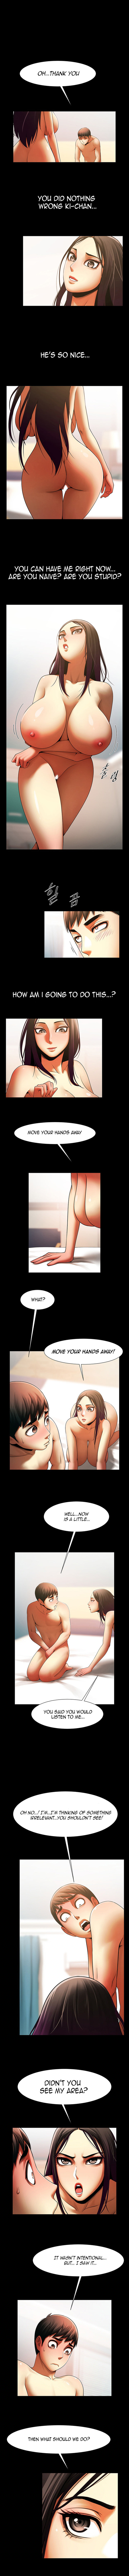 The Woman Who Lives In My Room - Chapter 16 Page 5